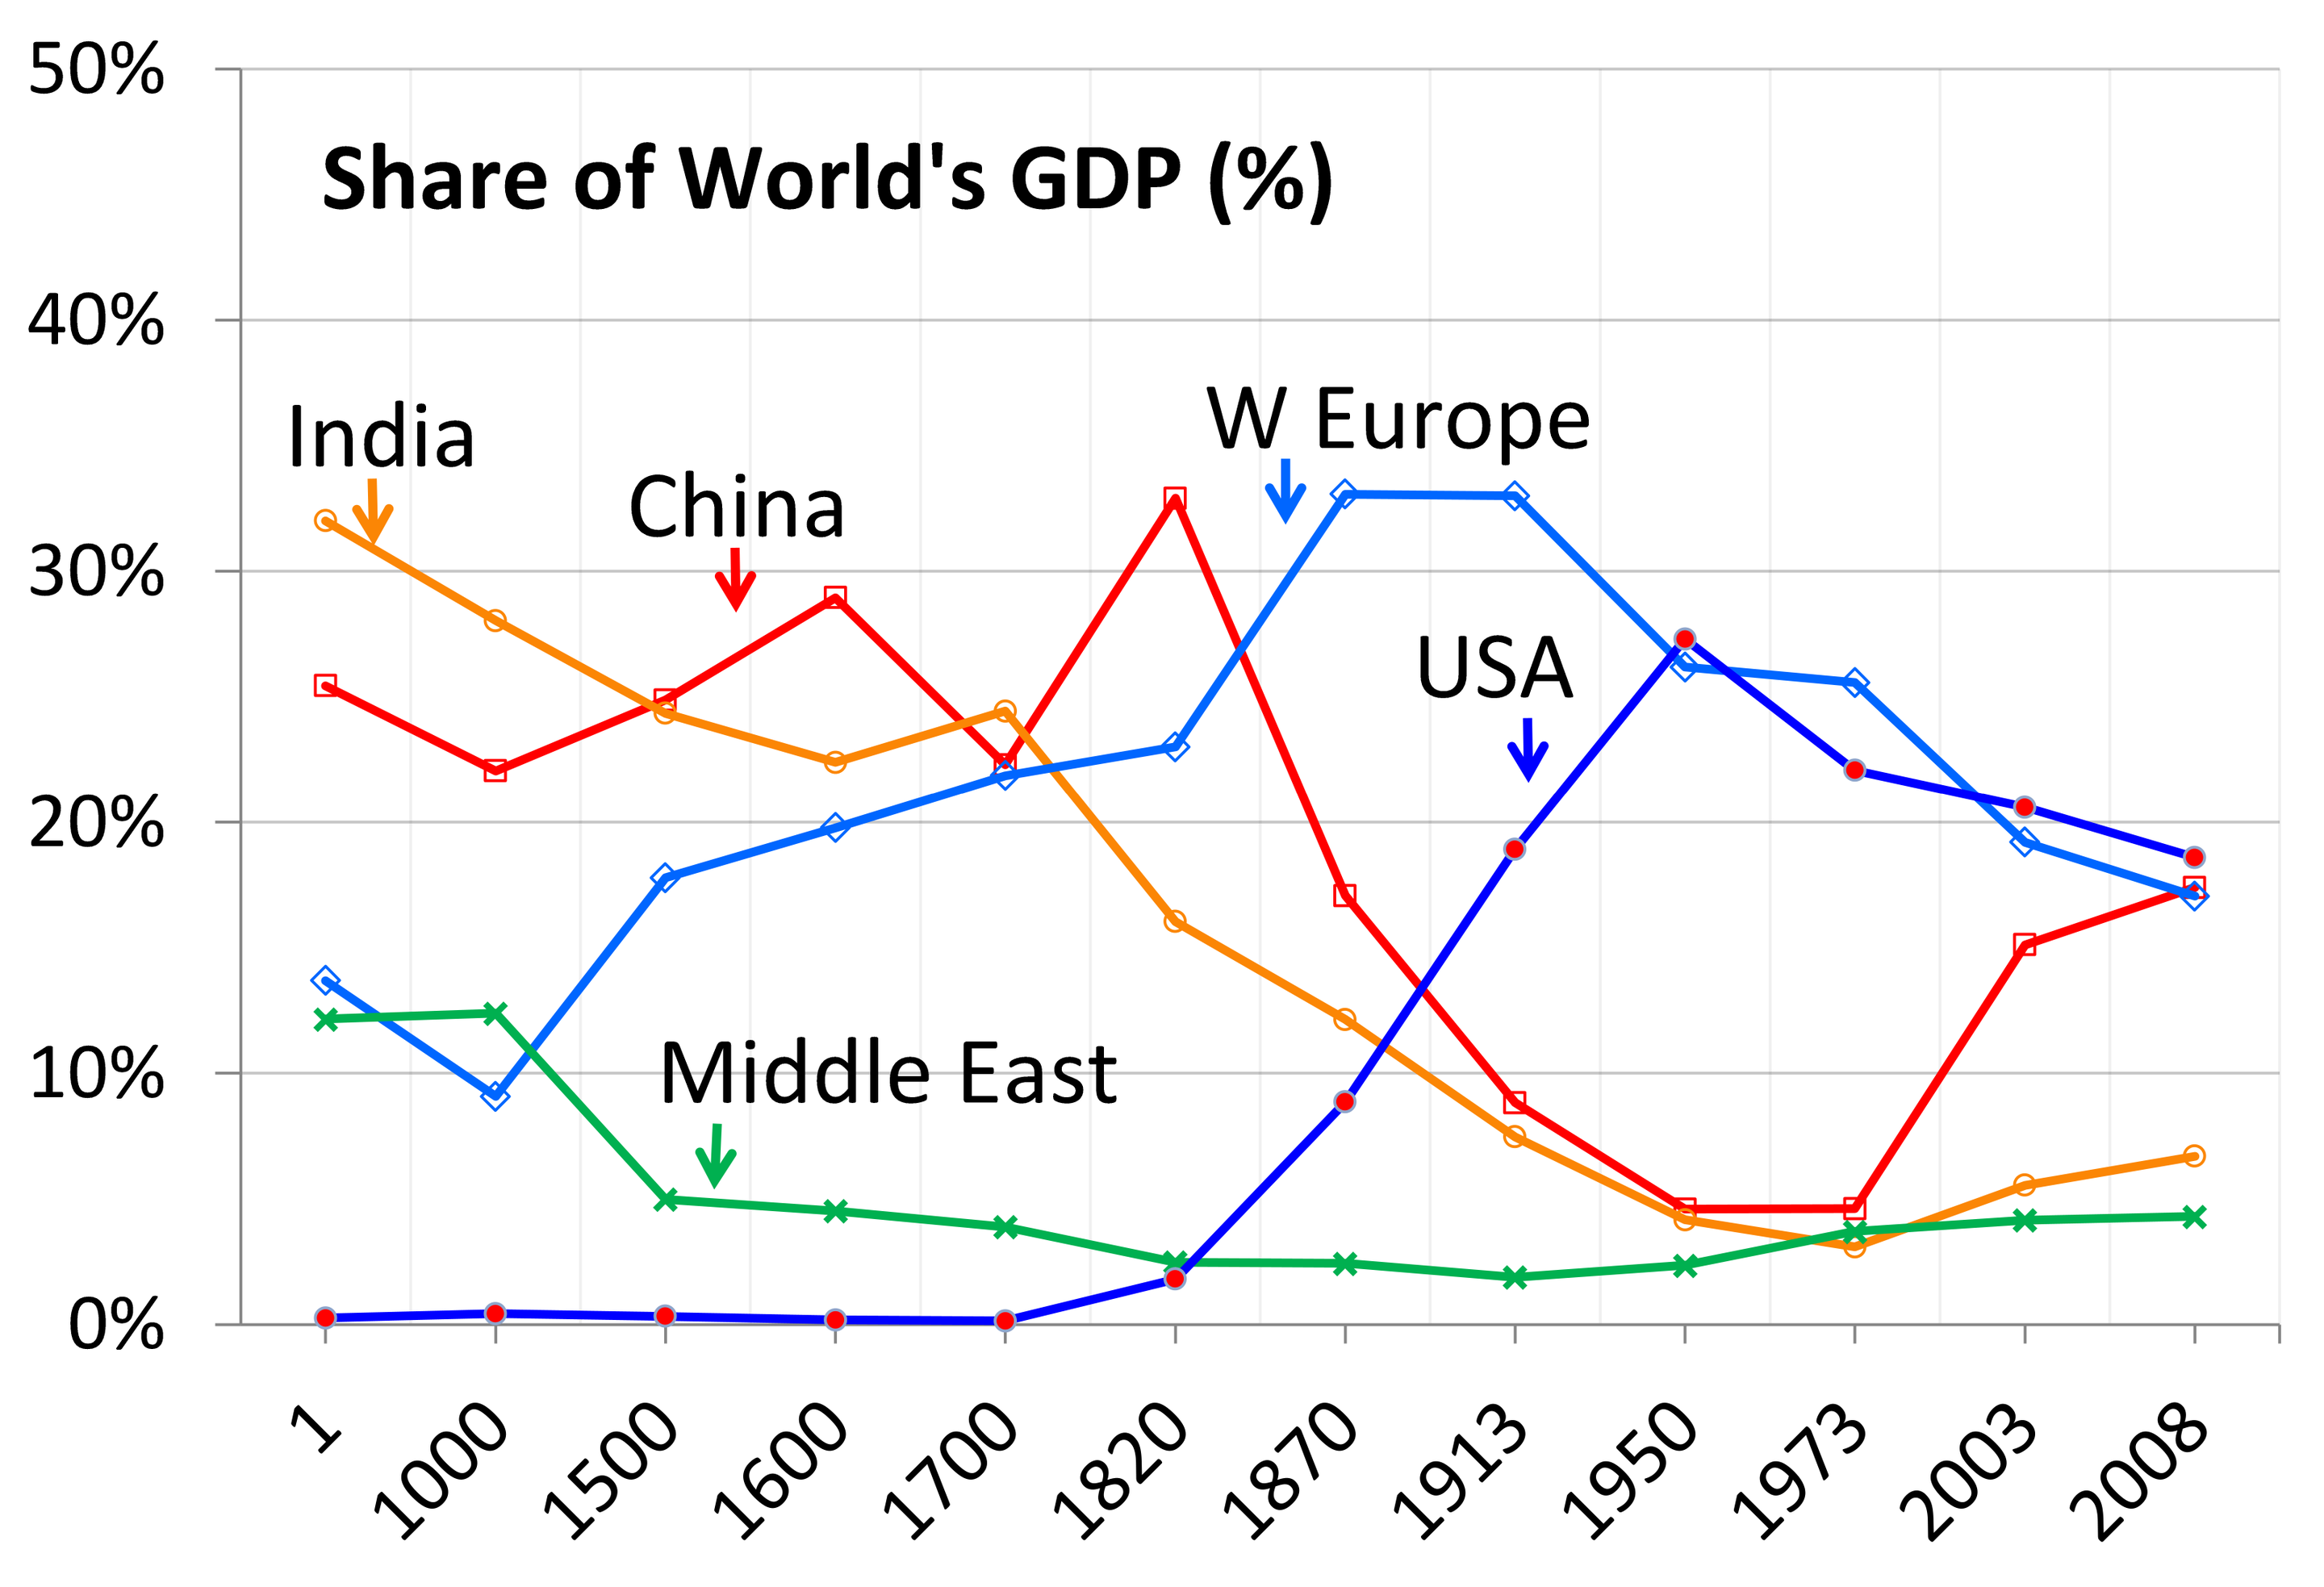 2880px-1_AD_to_2008_AD_trends_in_%25_GDP_contribution_by_major_economies_of_the_world.png